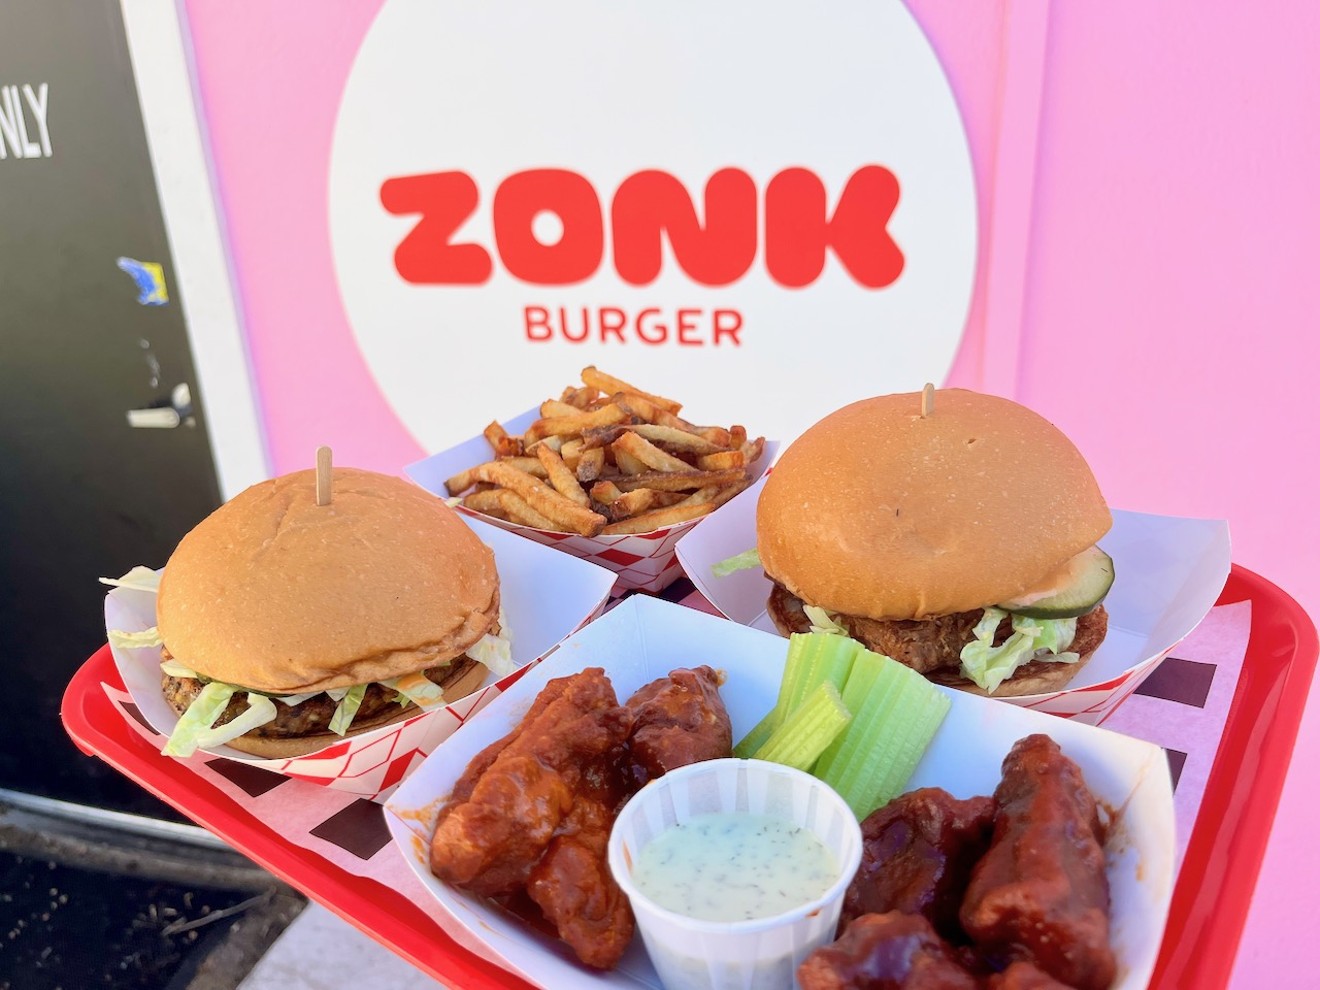 This Pepto-pink spot has the typical American burger stand fare, sans the meat.